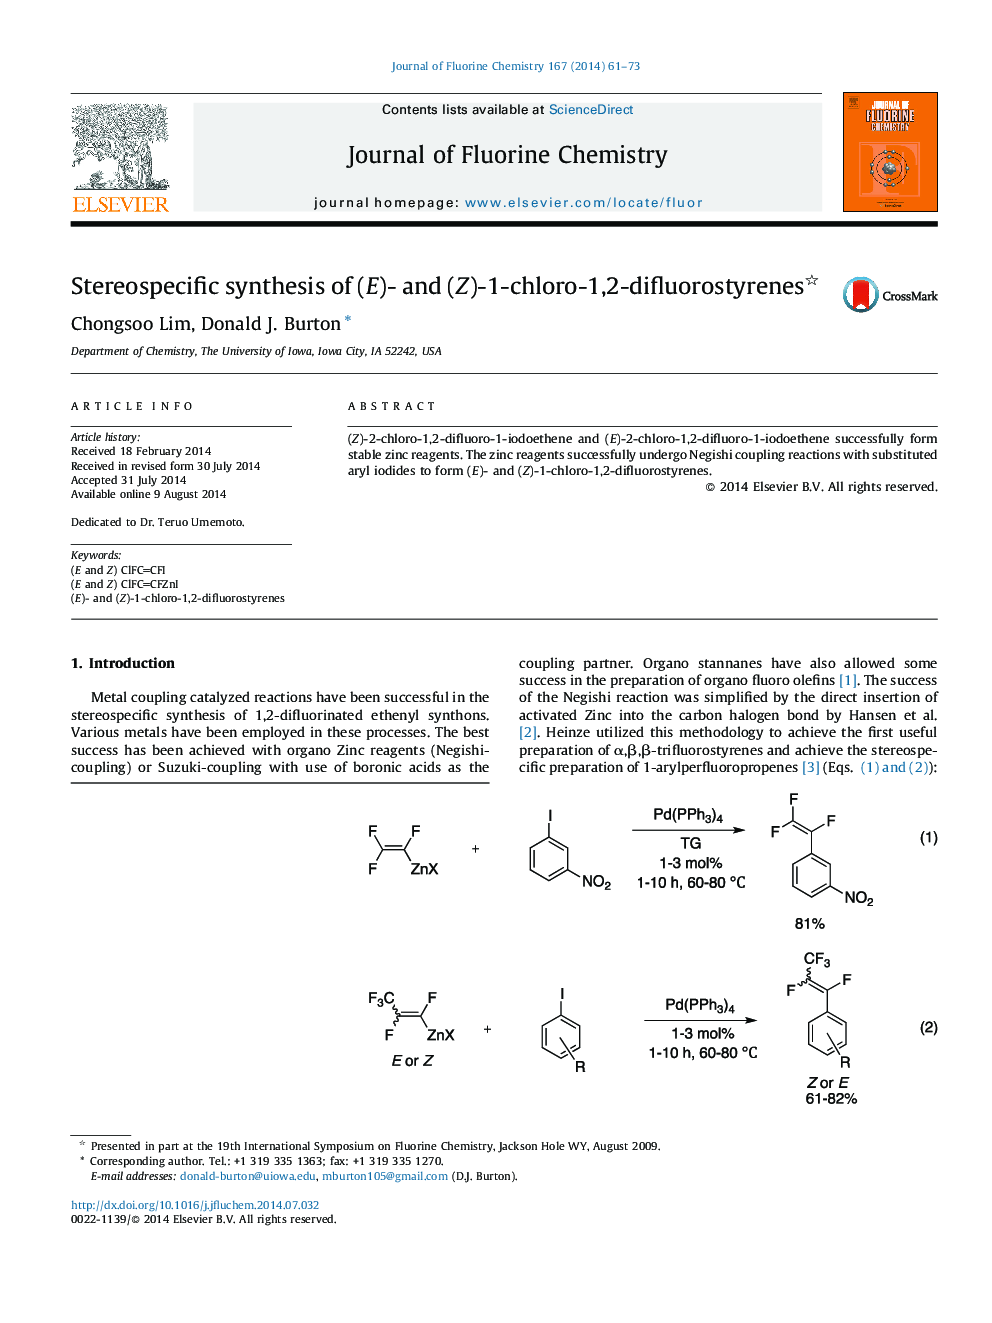 Stereospecific synthesis of (E)- and (Z)-1-chloro-1,2-difluorostyrenes